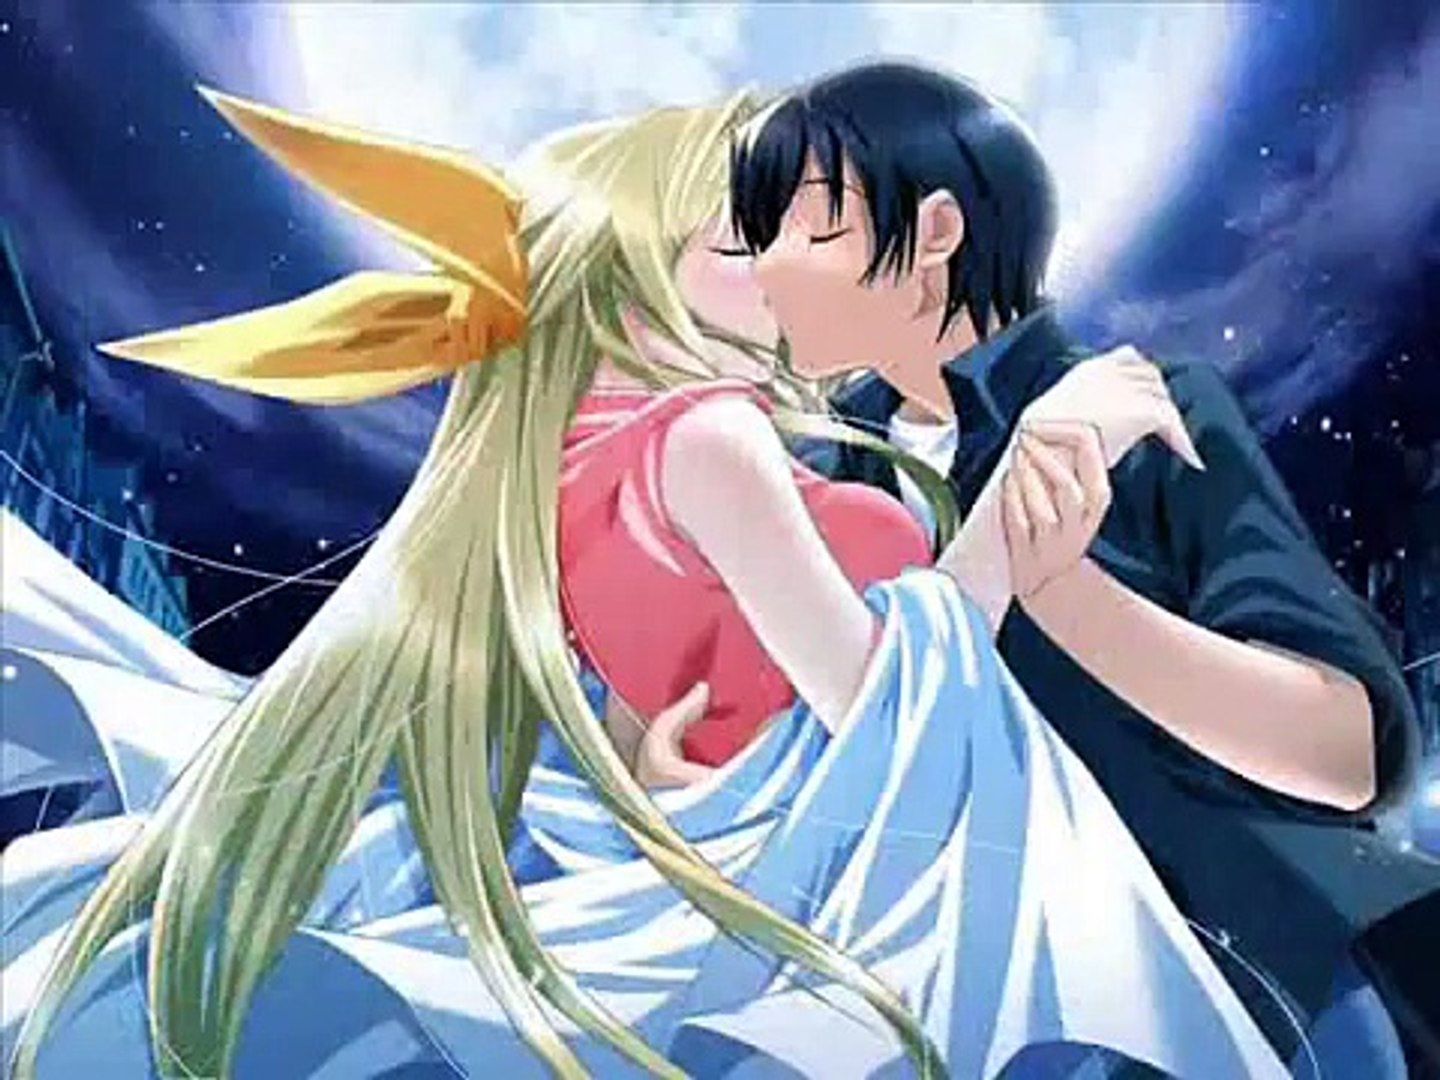 Im in heaven When you kiss me - ATC (anime with lyrics) - video Dailymotion